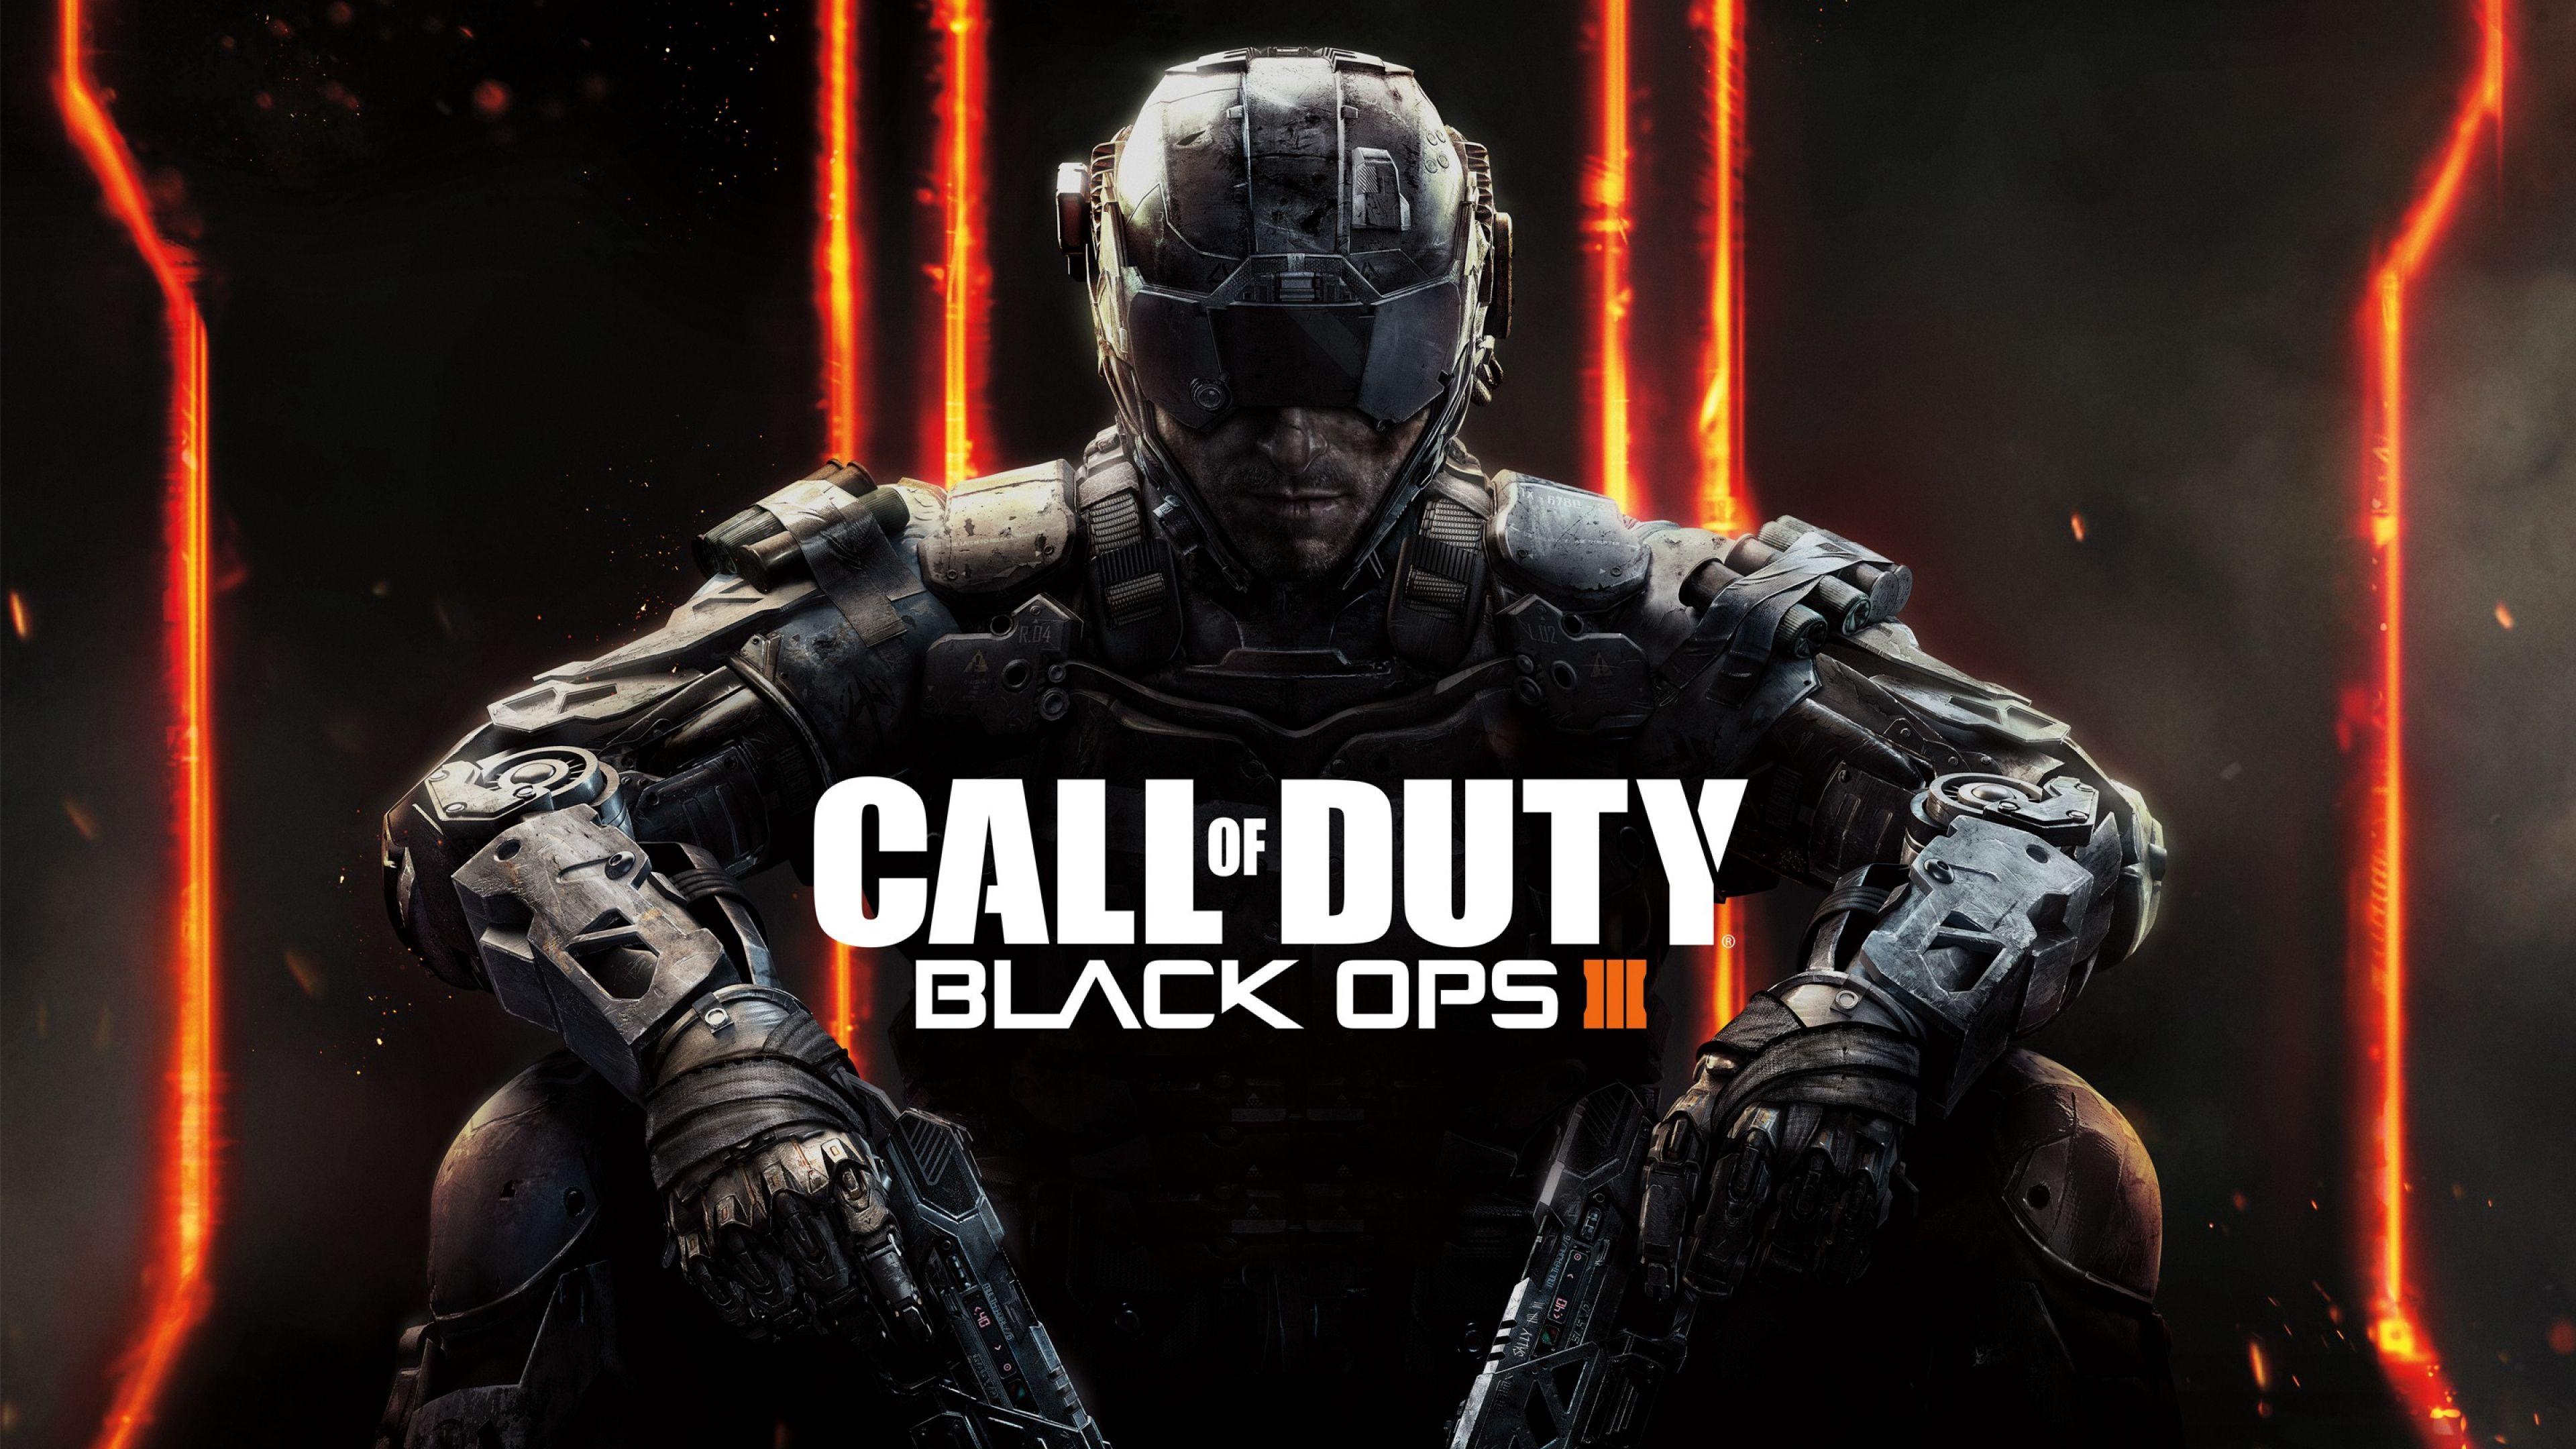 Download Wallpaper 3840x2160 Call of duty, Black ops, Black ops